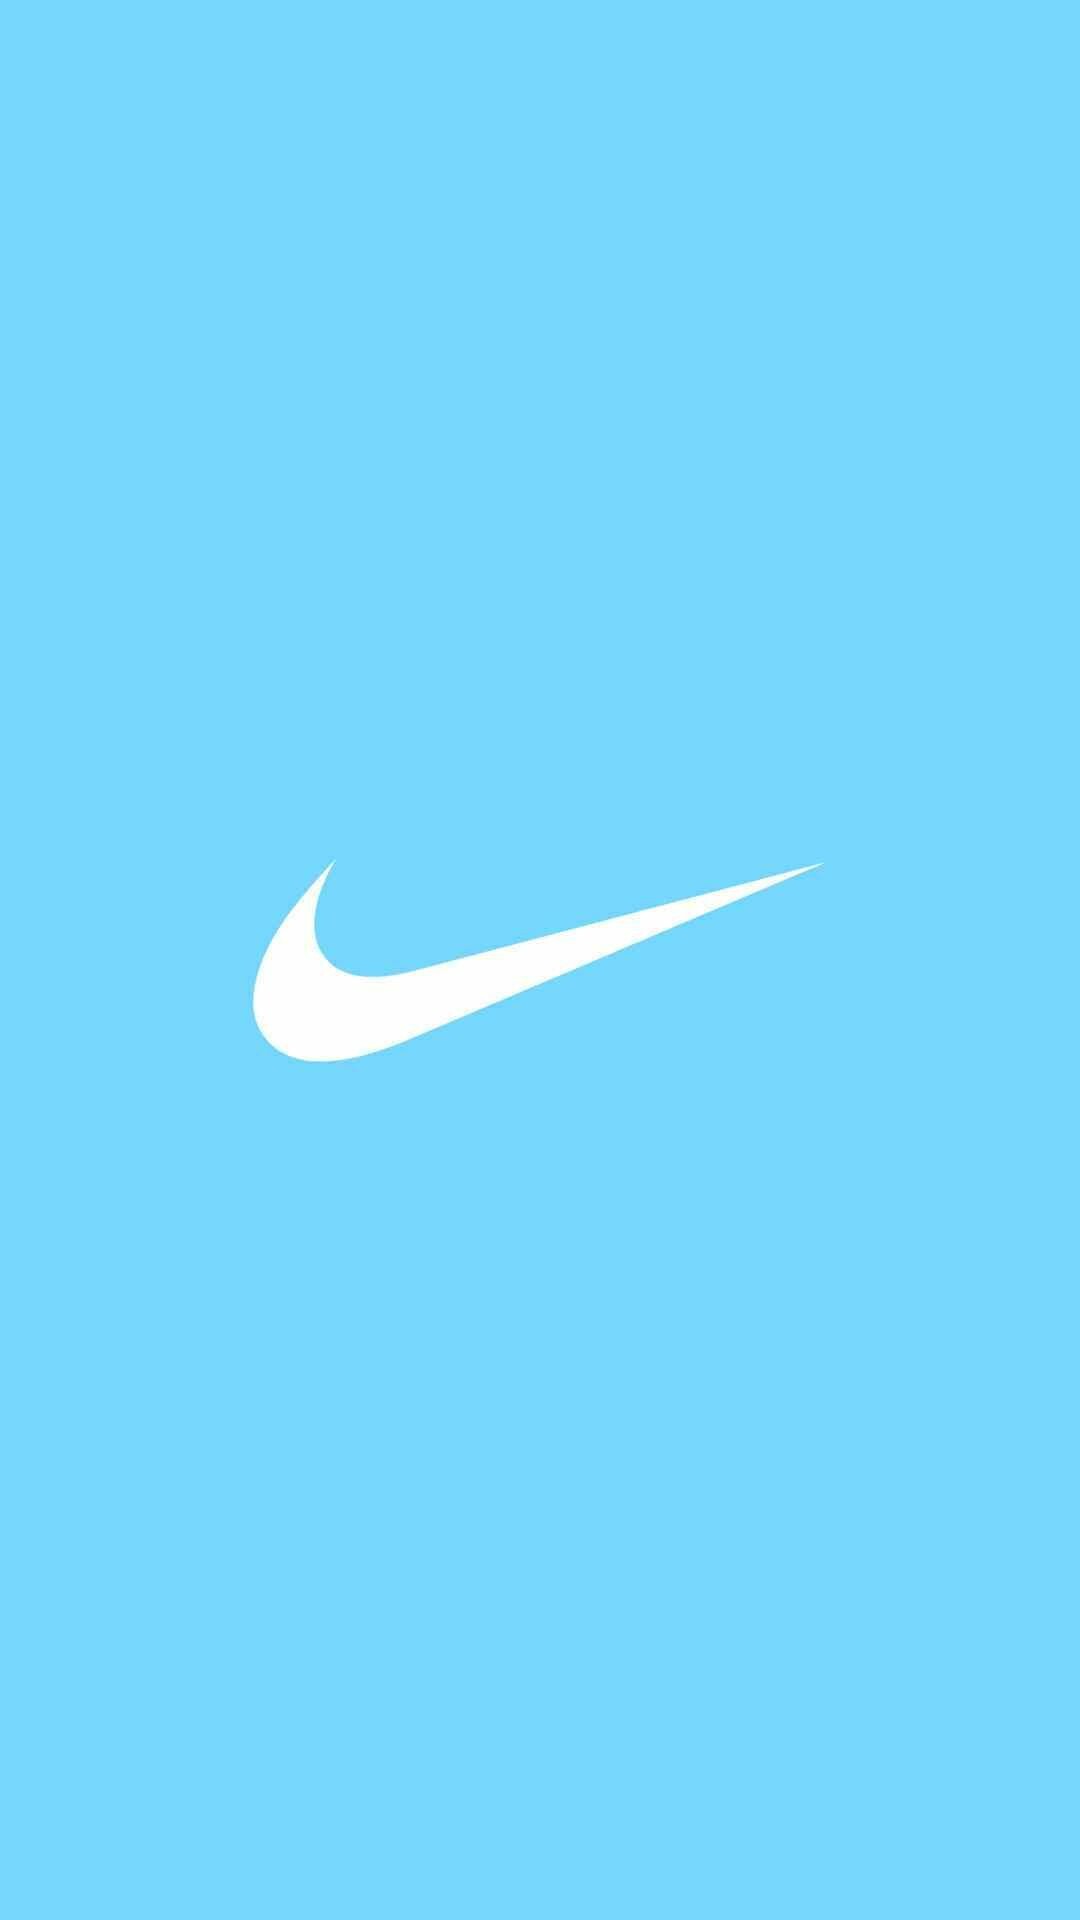 Nike: The world's leading designer, marketer, and distributor of authentic athletic footwear and apparel. 1080x1920 Full HD Wallpaper.